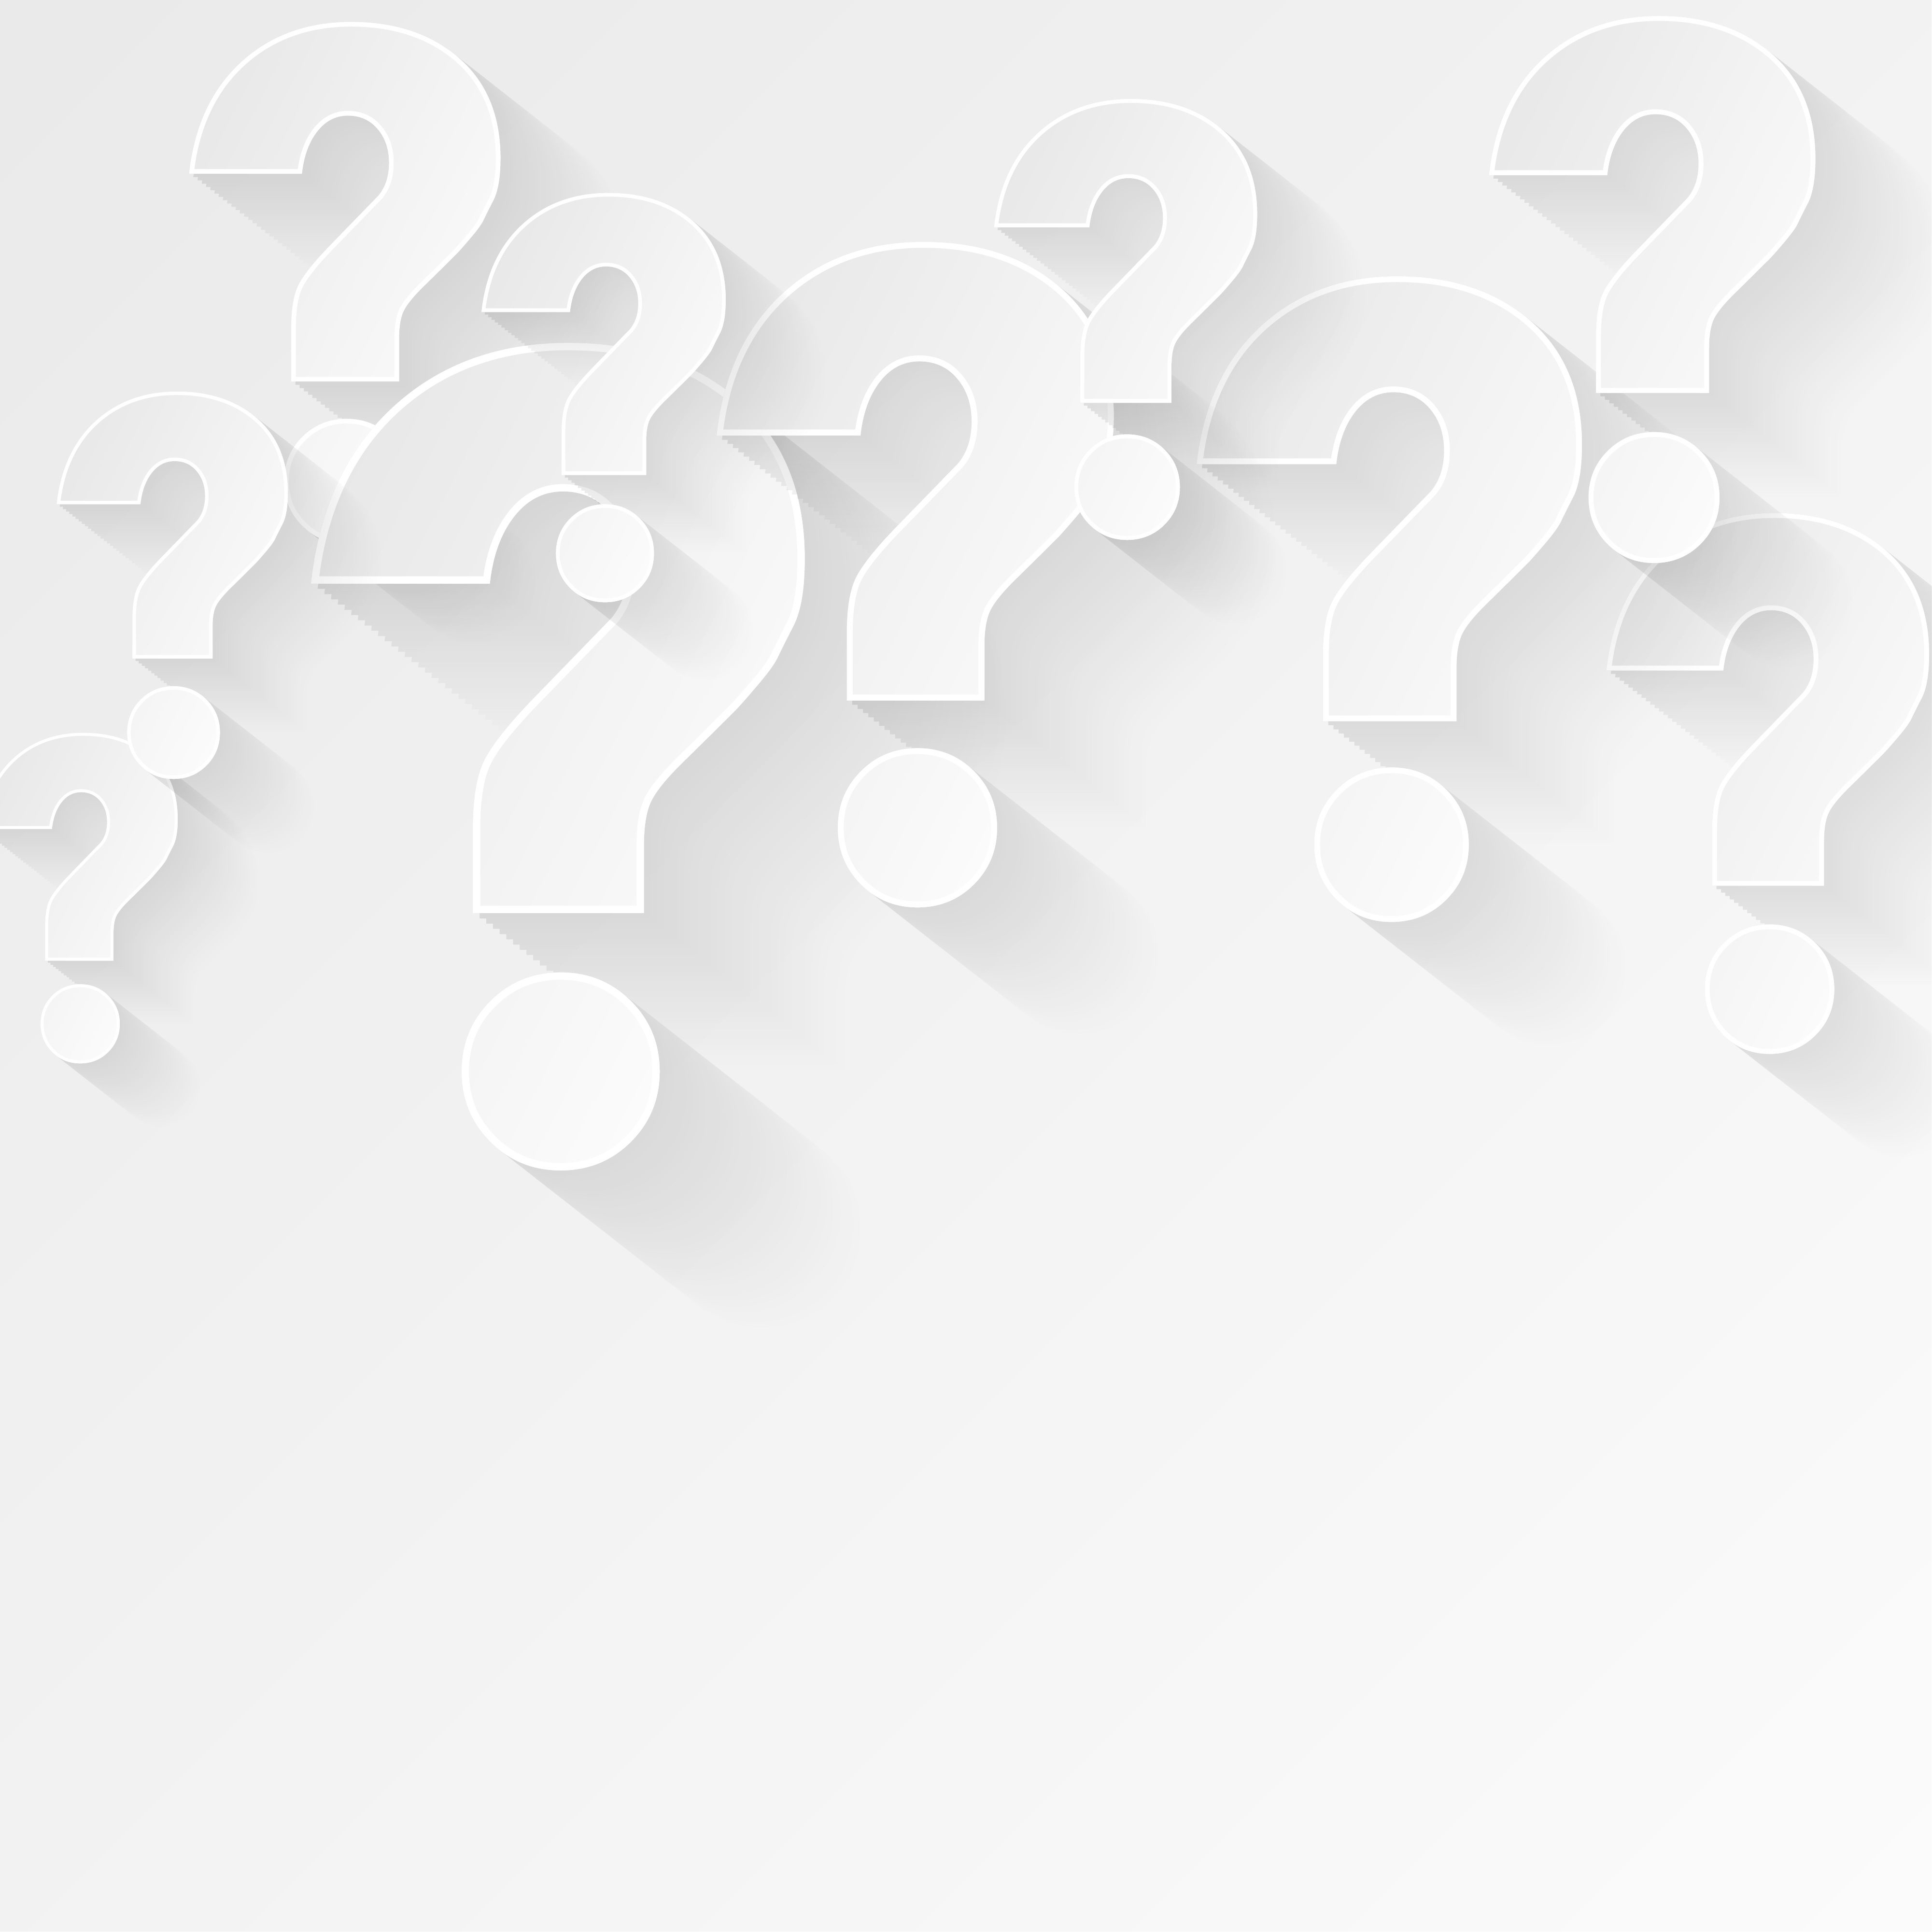 white question mark background in minimal style